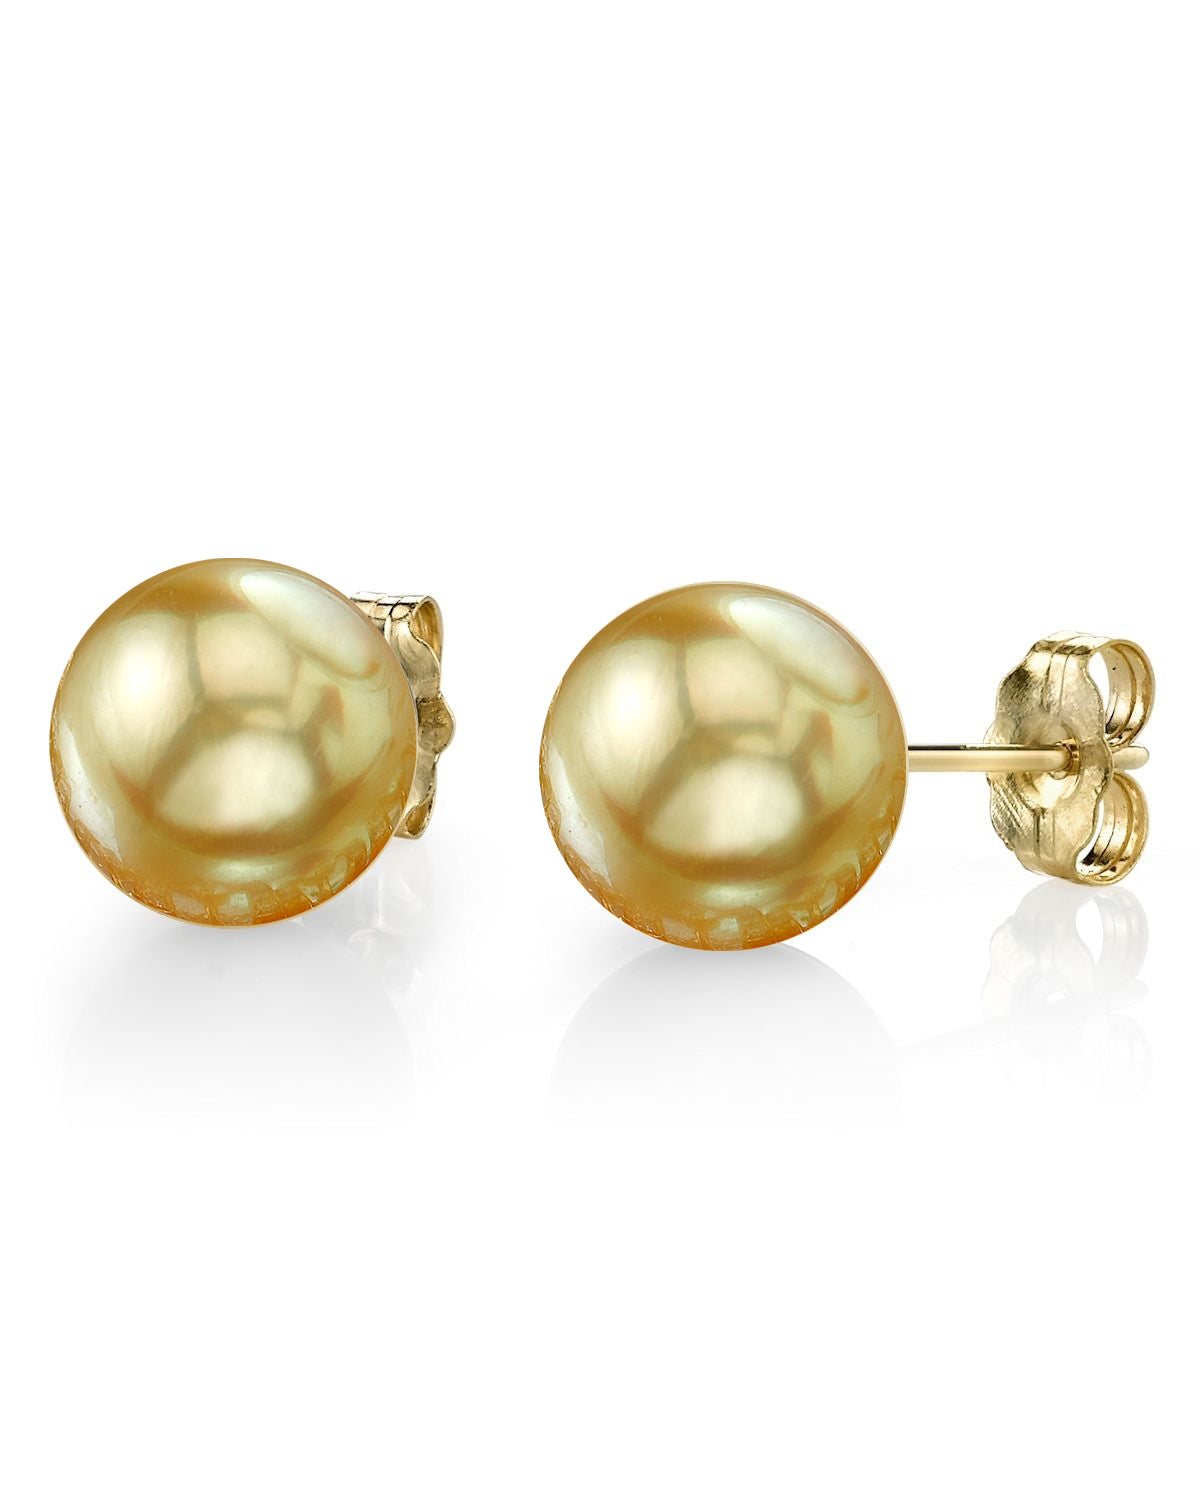 9mm Golden South Sea Round Pearl Stud Earrings- Choose Your